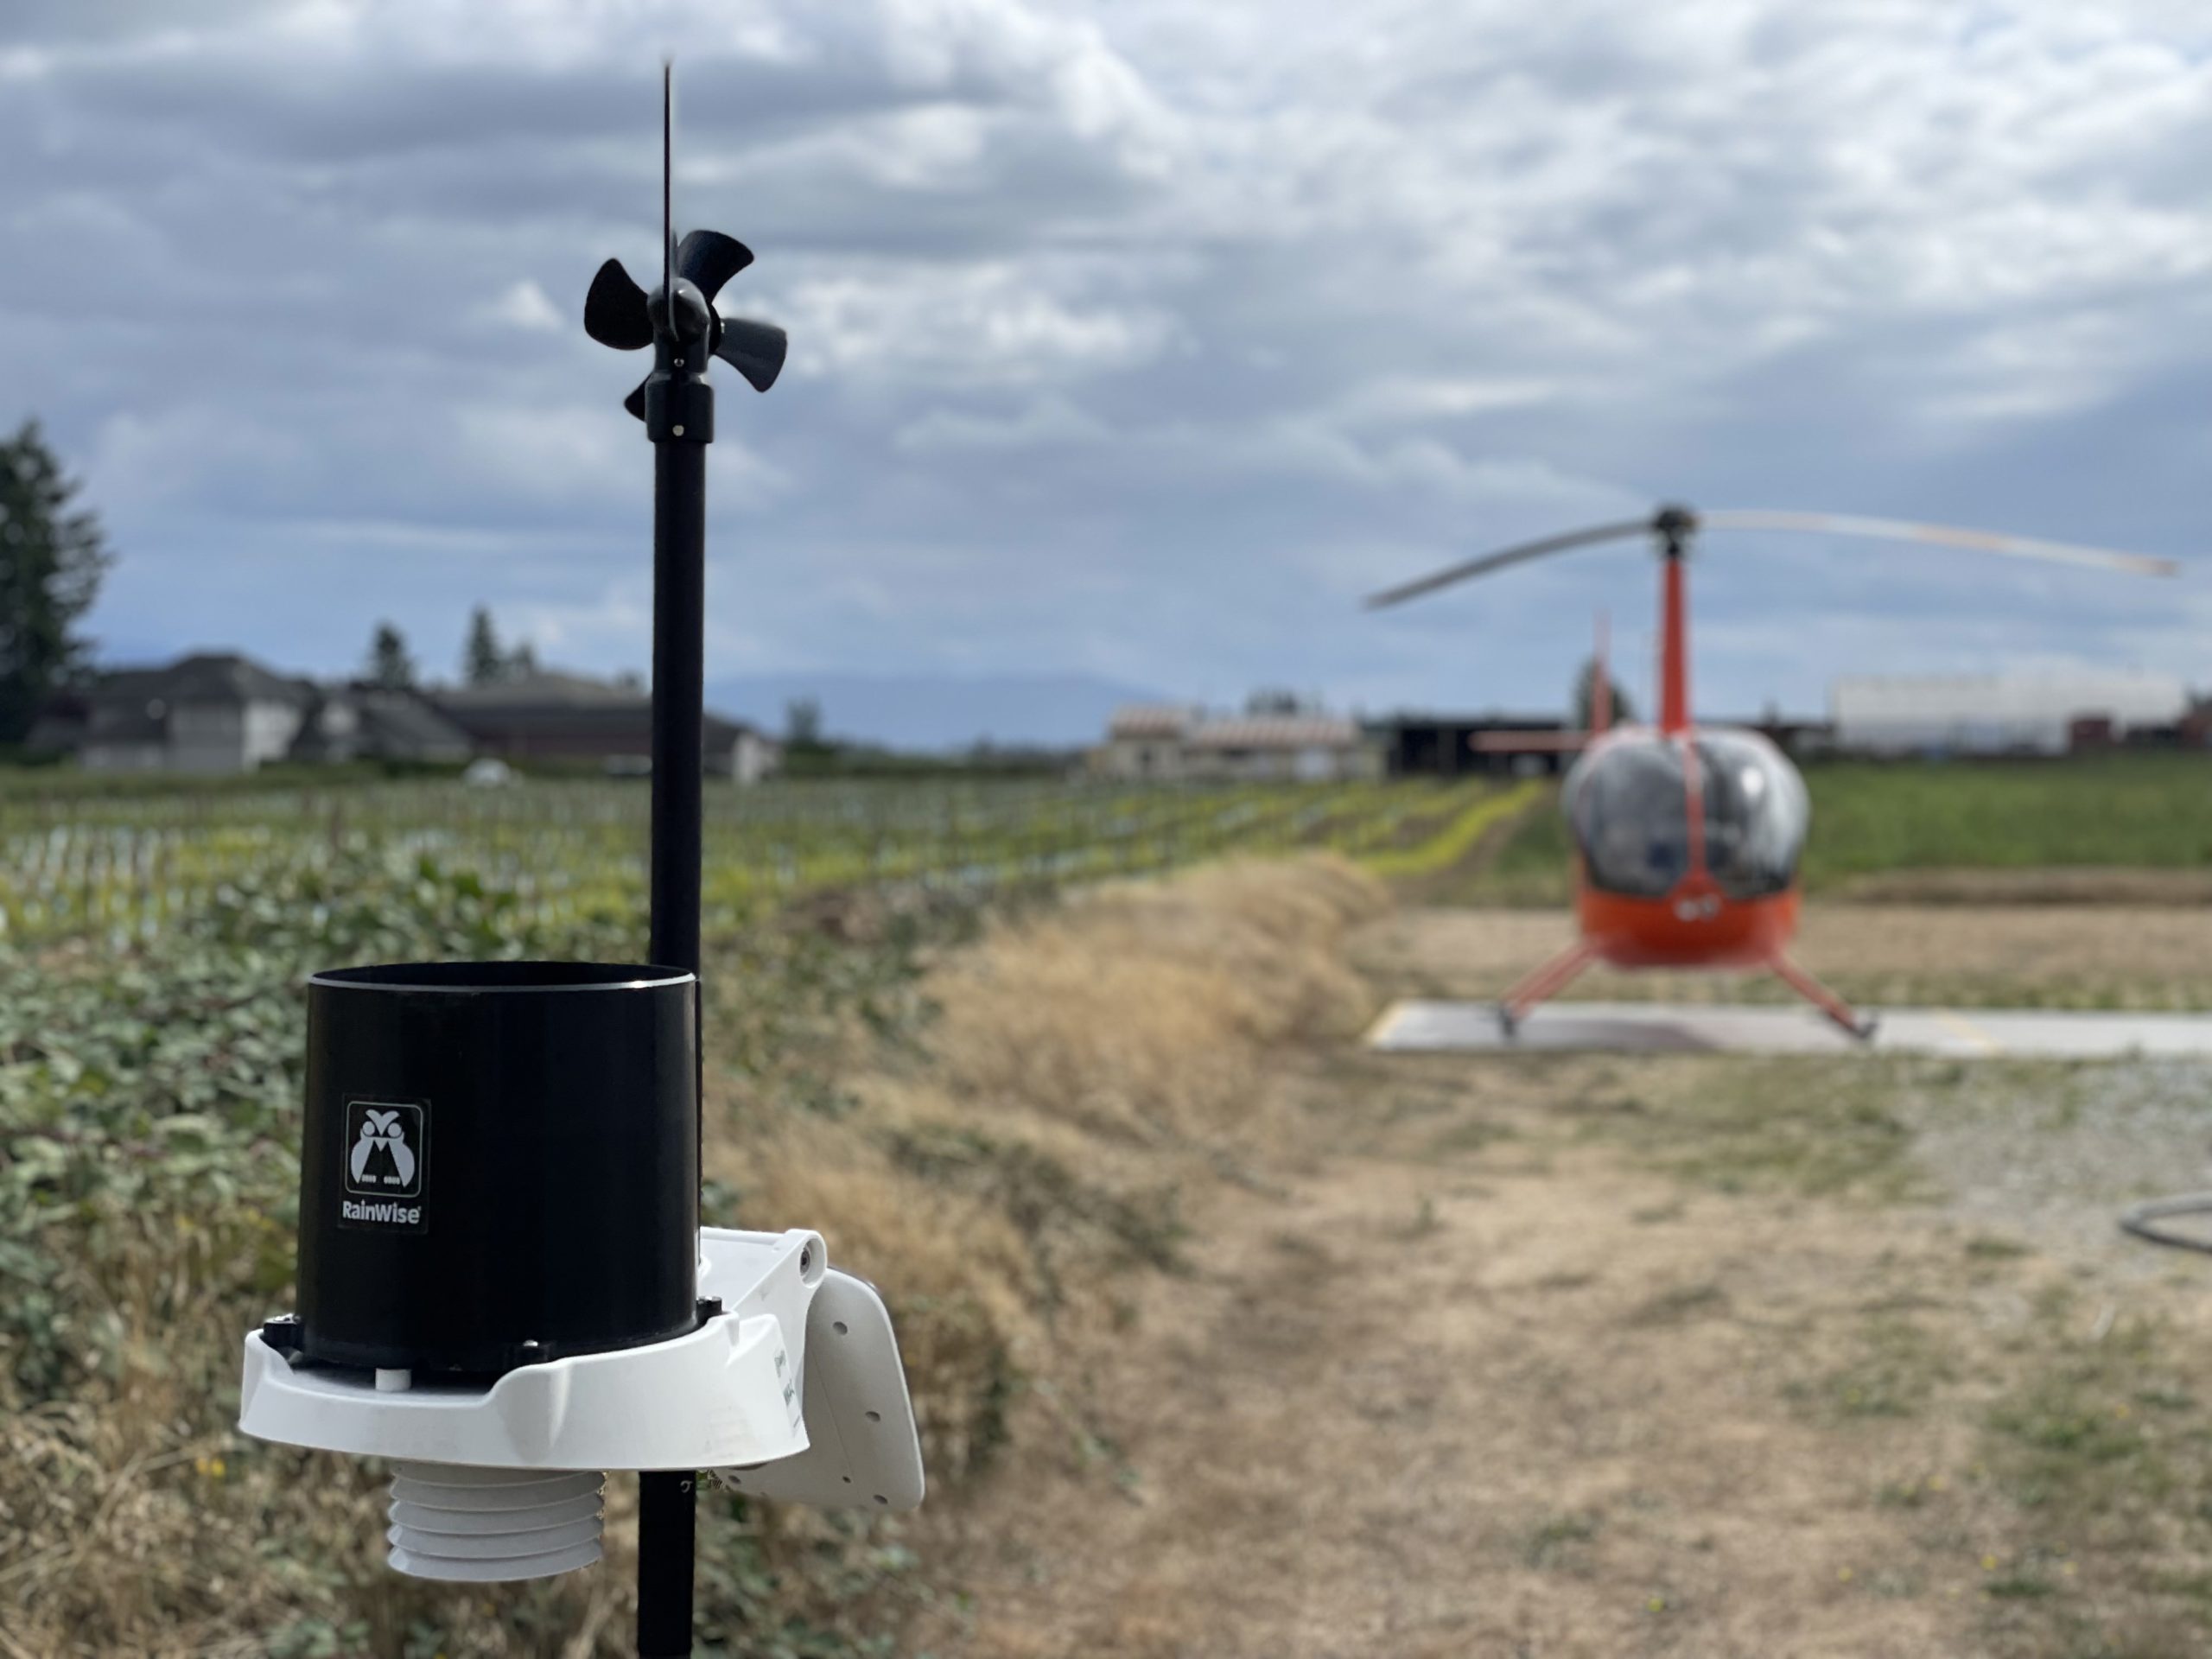 Weather Stations for Aviation, featuring advanced meteorological equipment designed to provide accurate and real-time weather data for aviation purposes, ensuring safe and efficient flight operations.